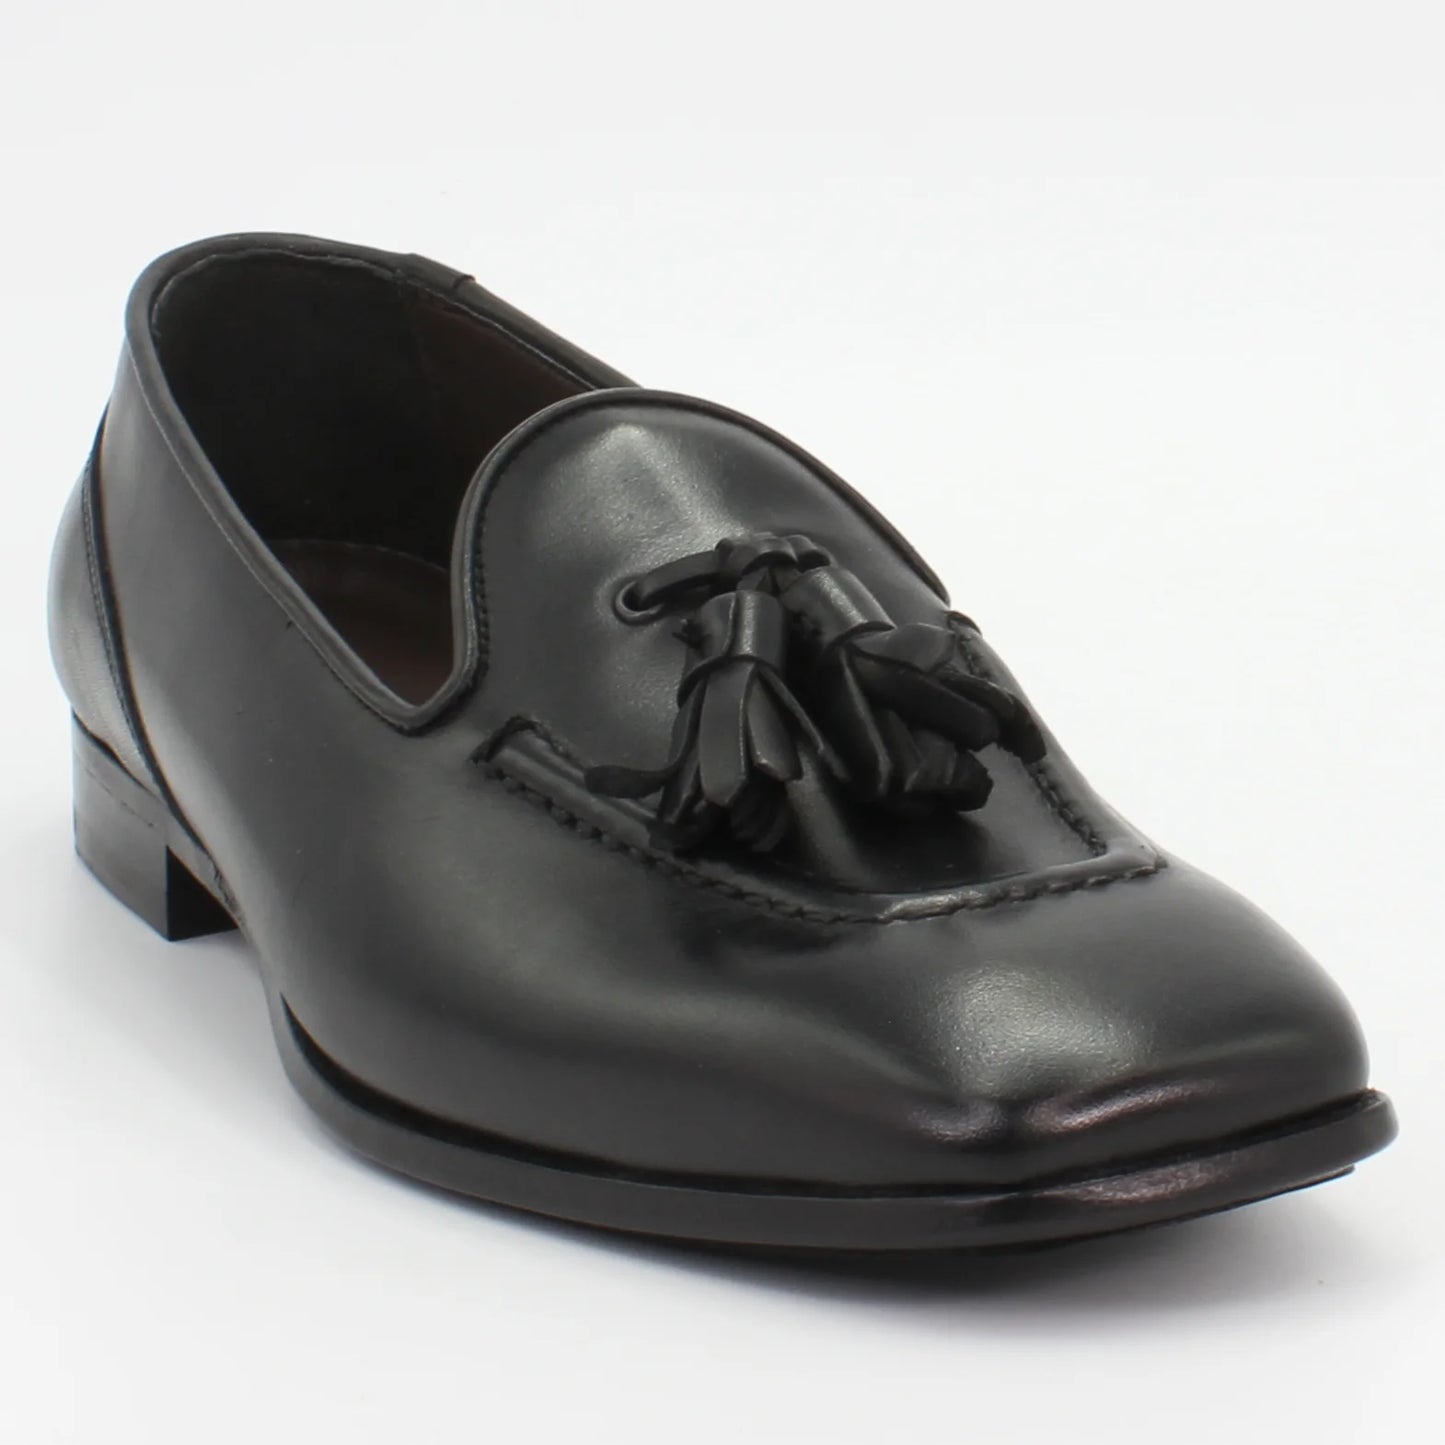  Shop Handmade Italian Leather moccasin in black (BRD10678) or browse our range of hand-made Italian shoes for men in leather or suede in-store at Aliverti Cape Town, or shop online. We deliver in South Africa & offer multiple payment plans as well as accept multiple safe & secure payment methods.